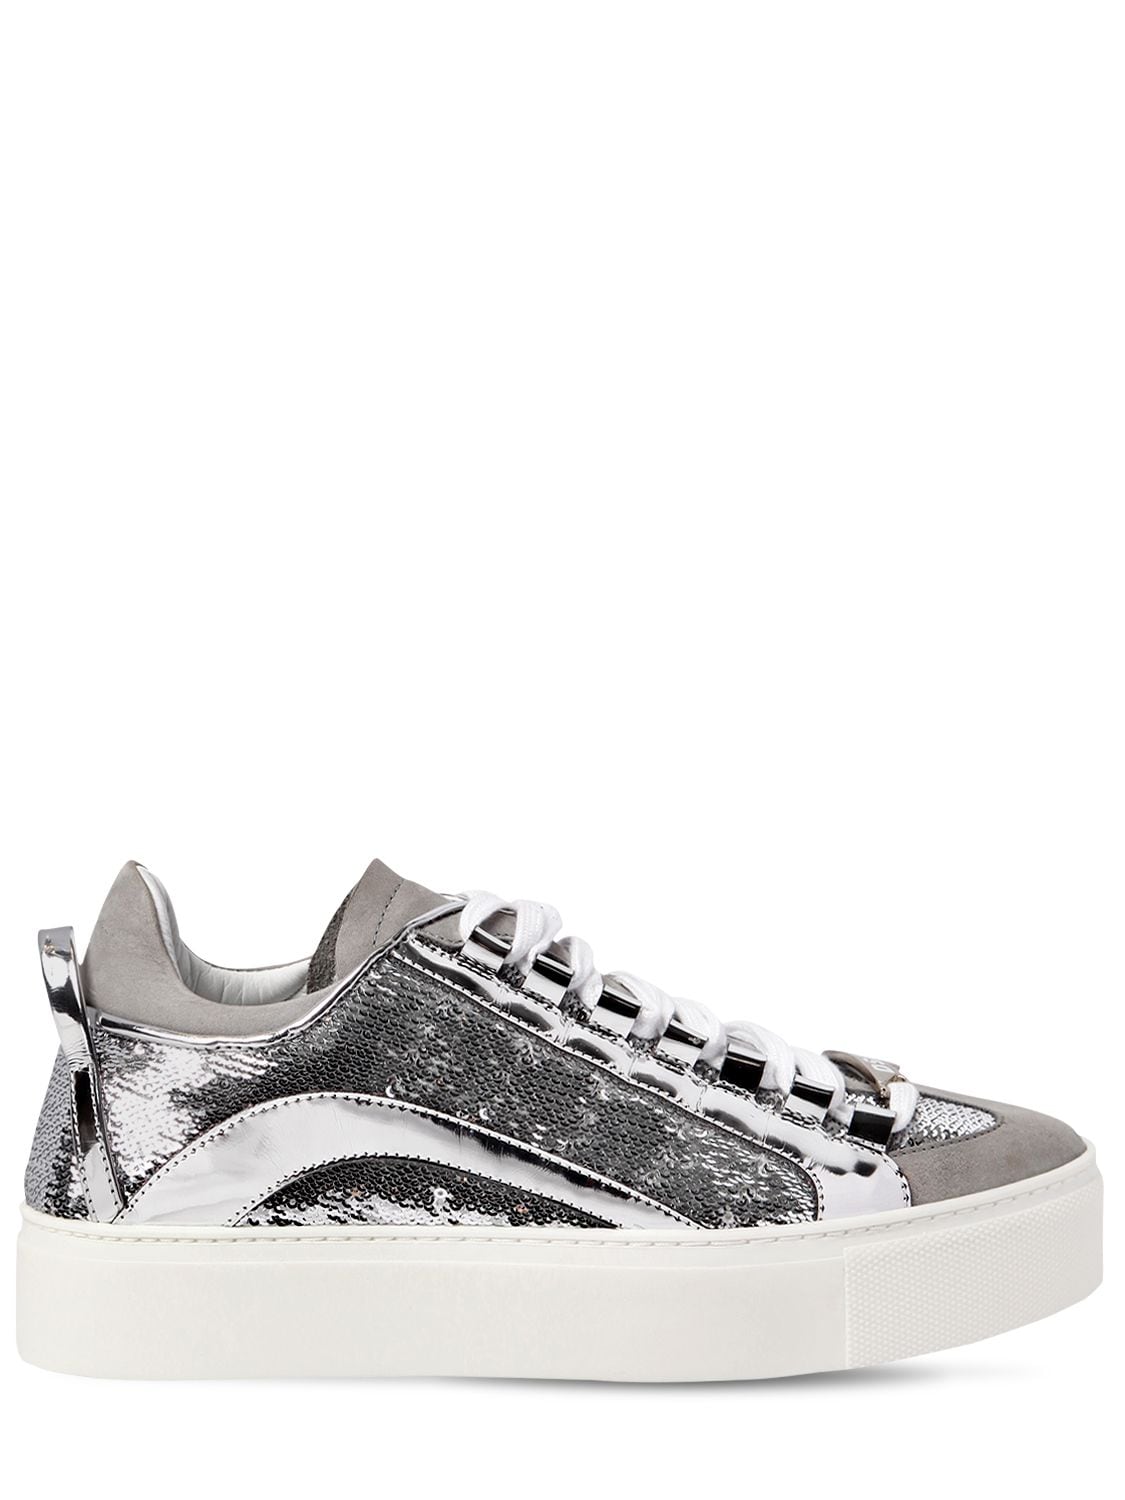 DSQUARED2 40MM 551 SEQUINED LEATHER SNEAKERS,68I0EO002-MJEZNW2